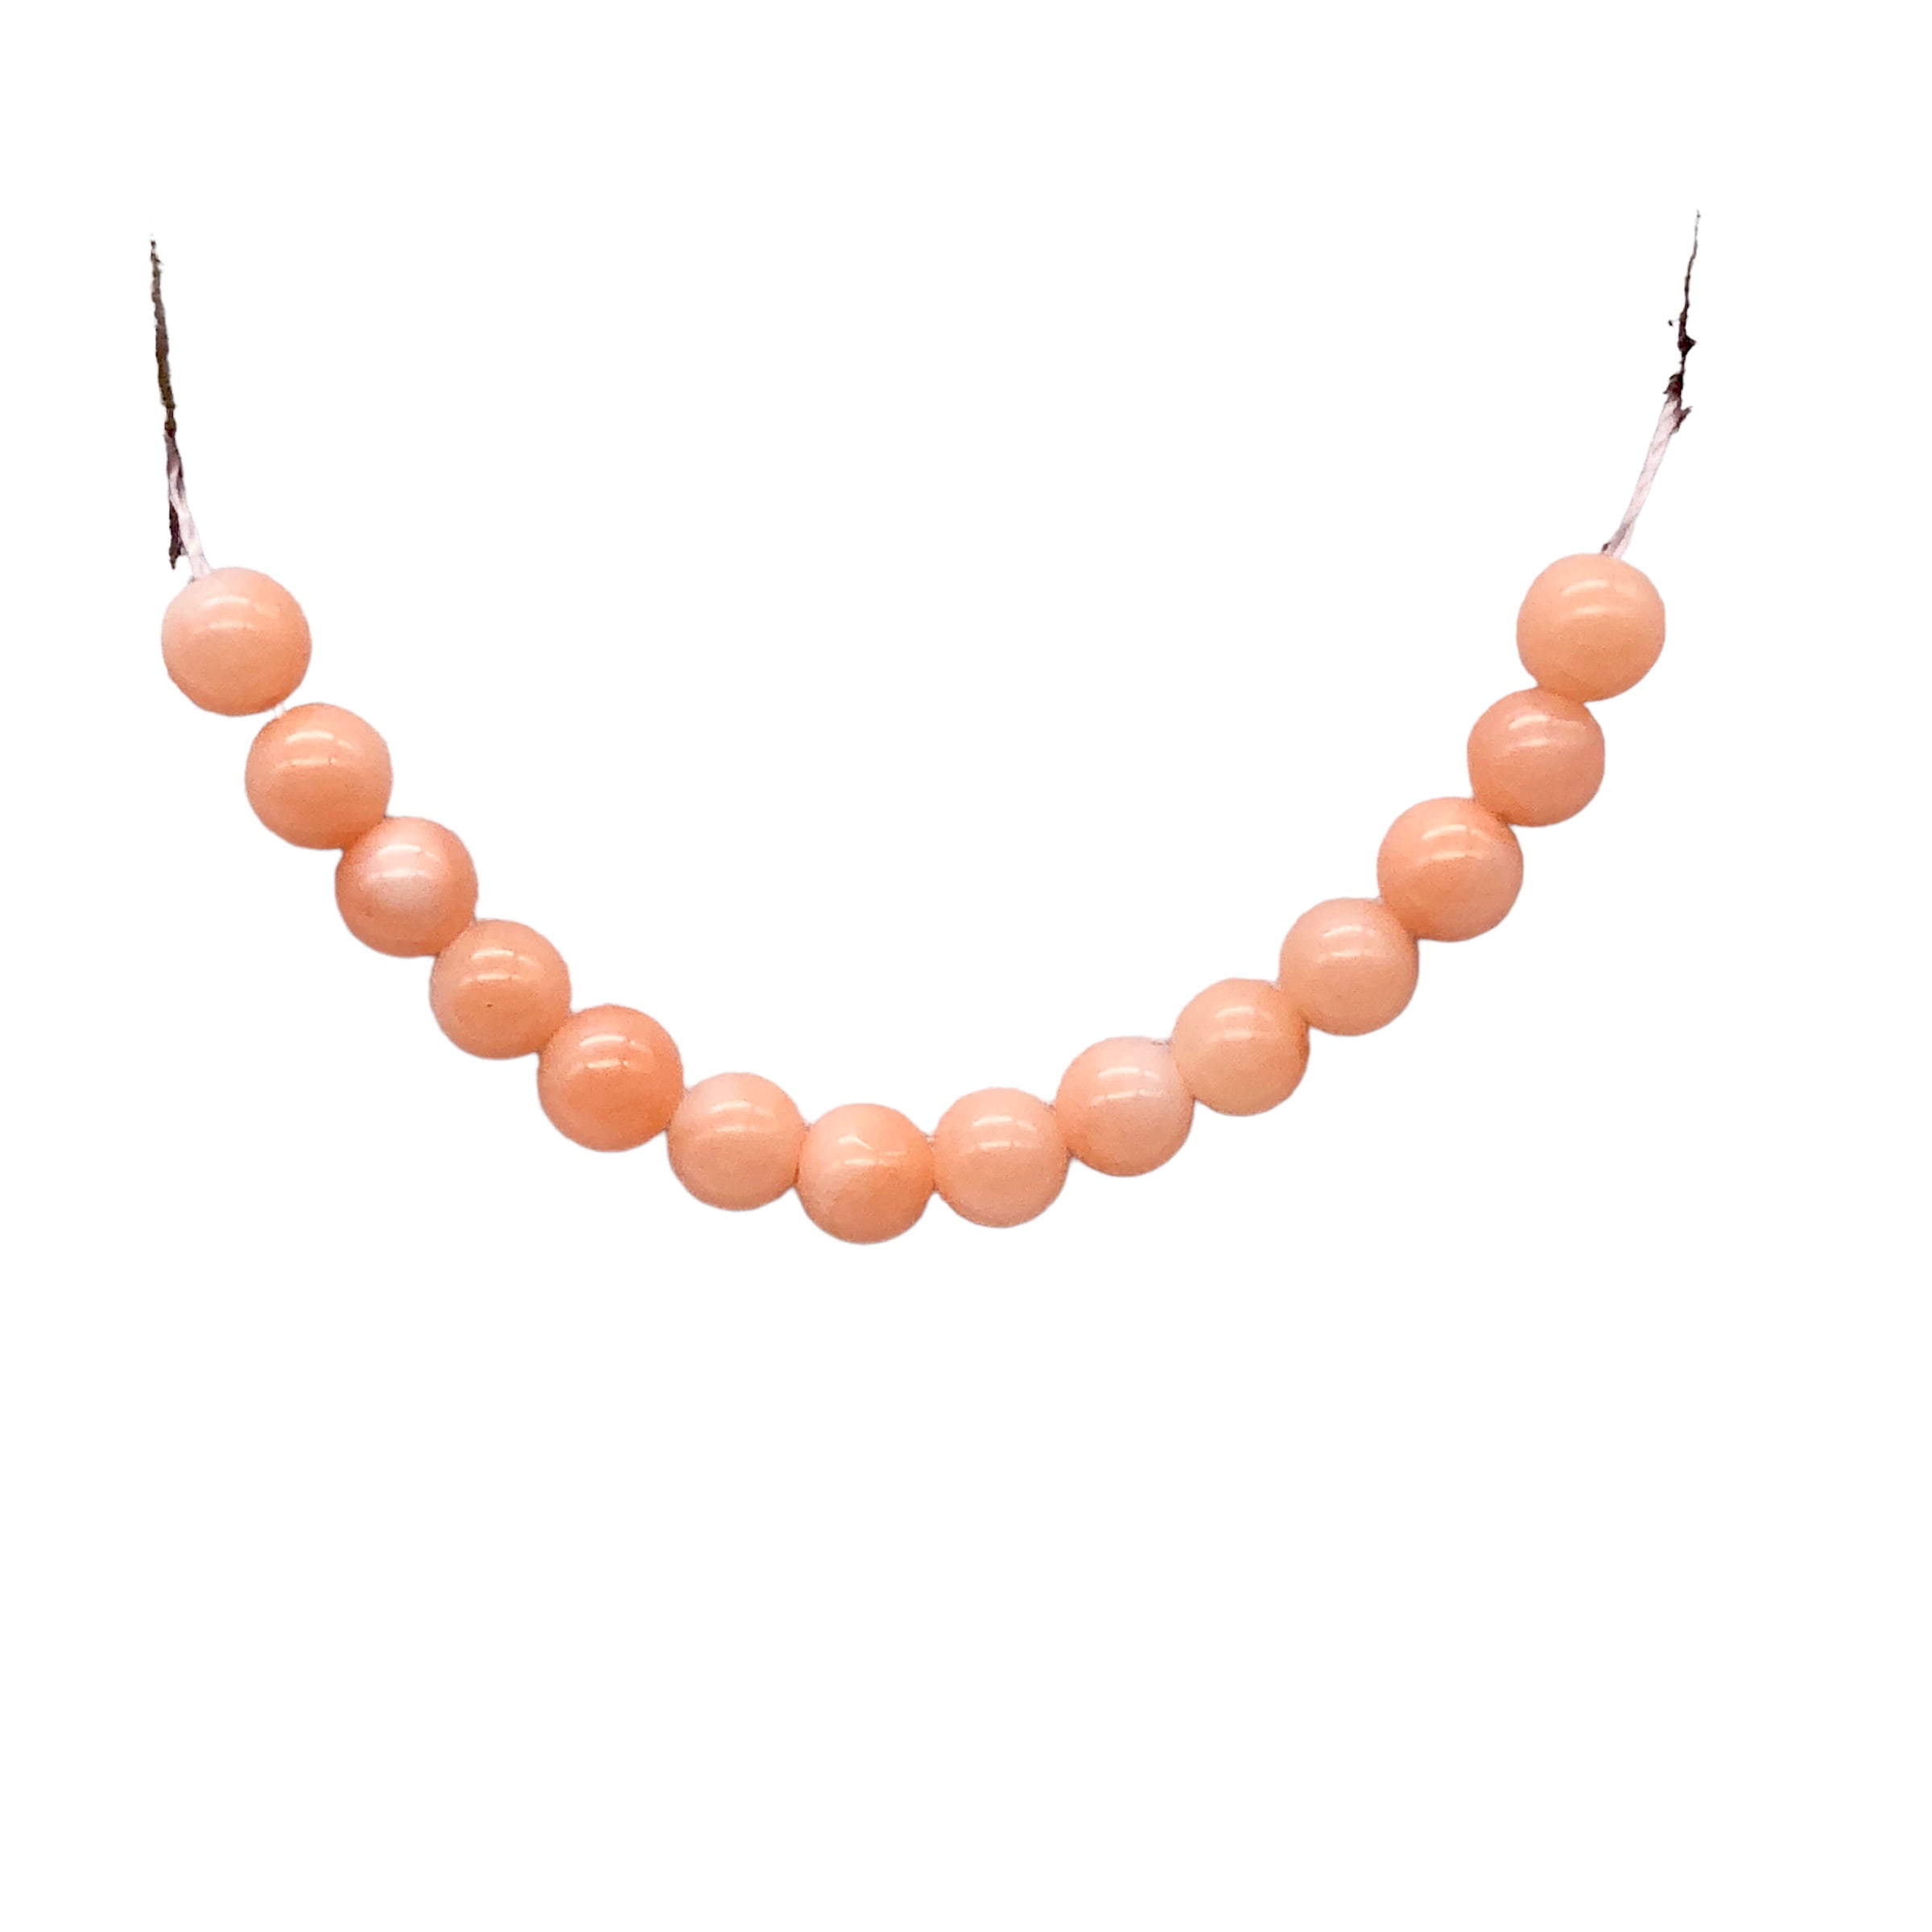 AAA+ Natural Salmon/Pink Coral Beads, 14 Beads